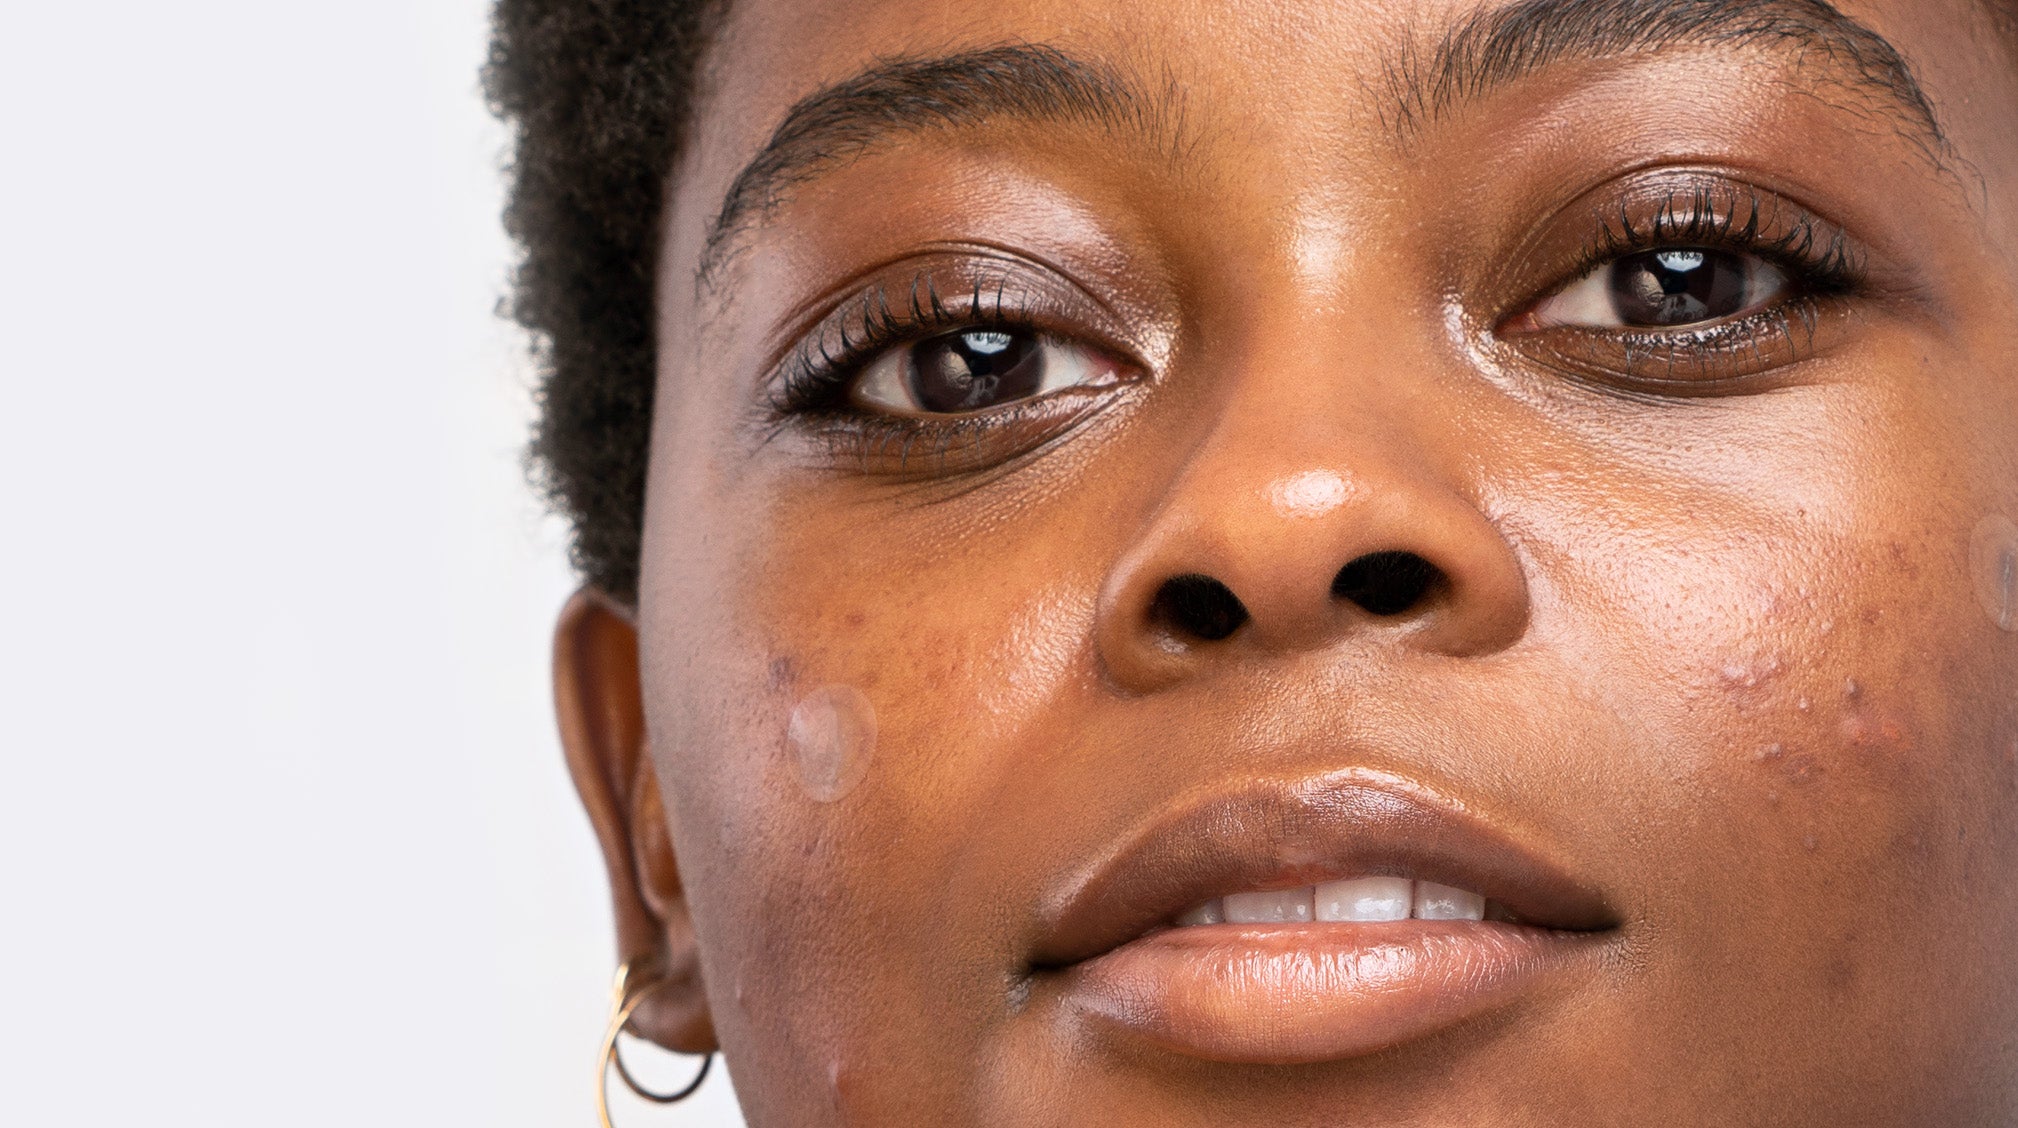 Some Pimples Are Worse Than Others: How to Treat Cystic Acne